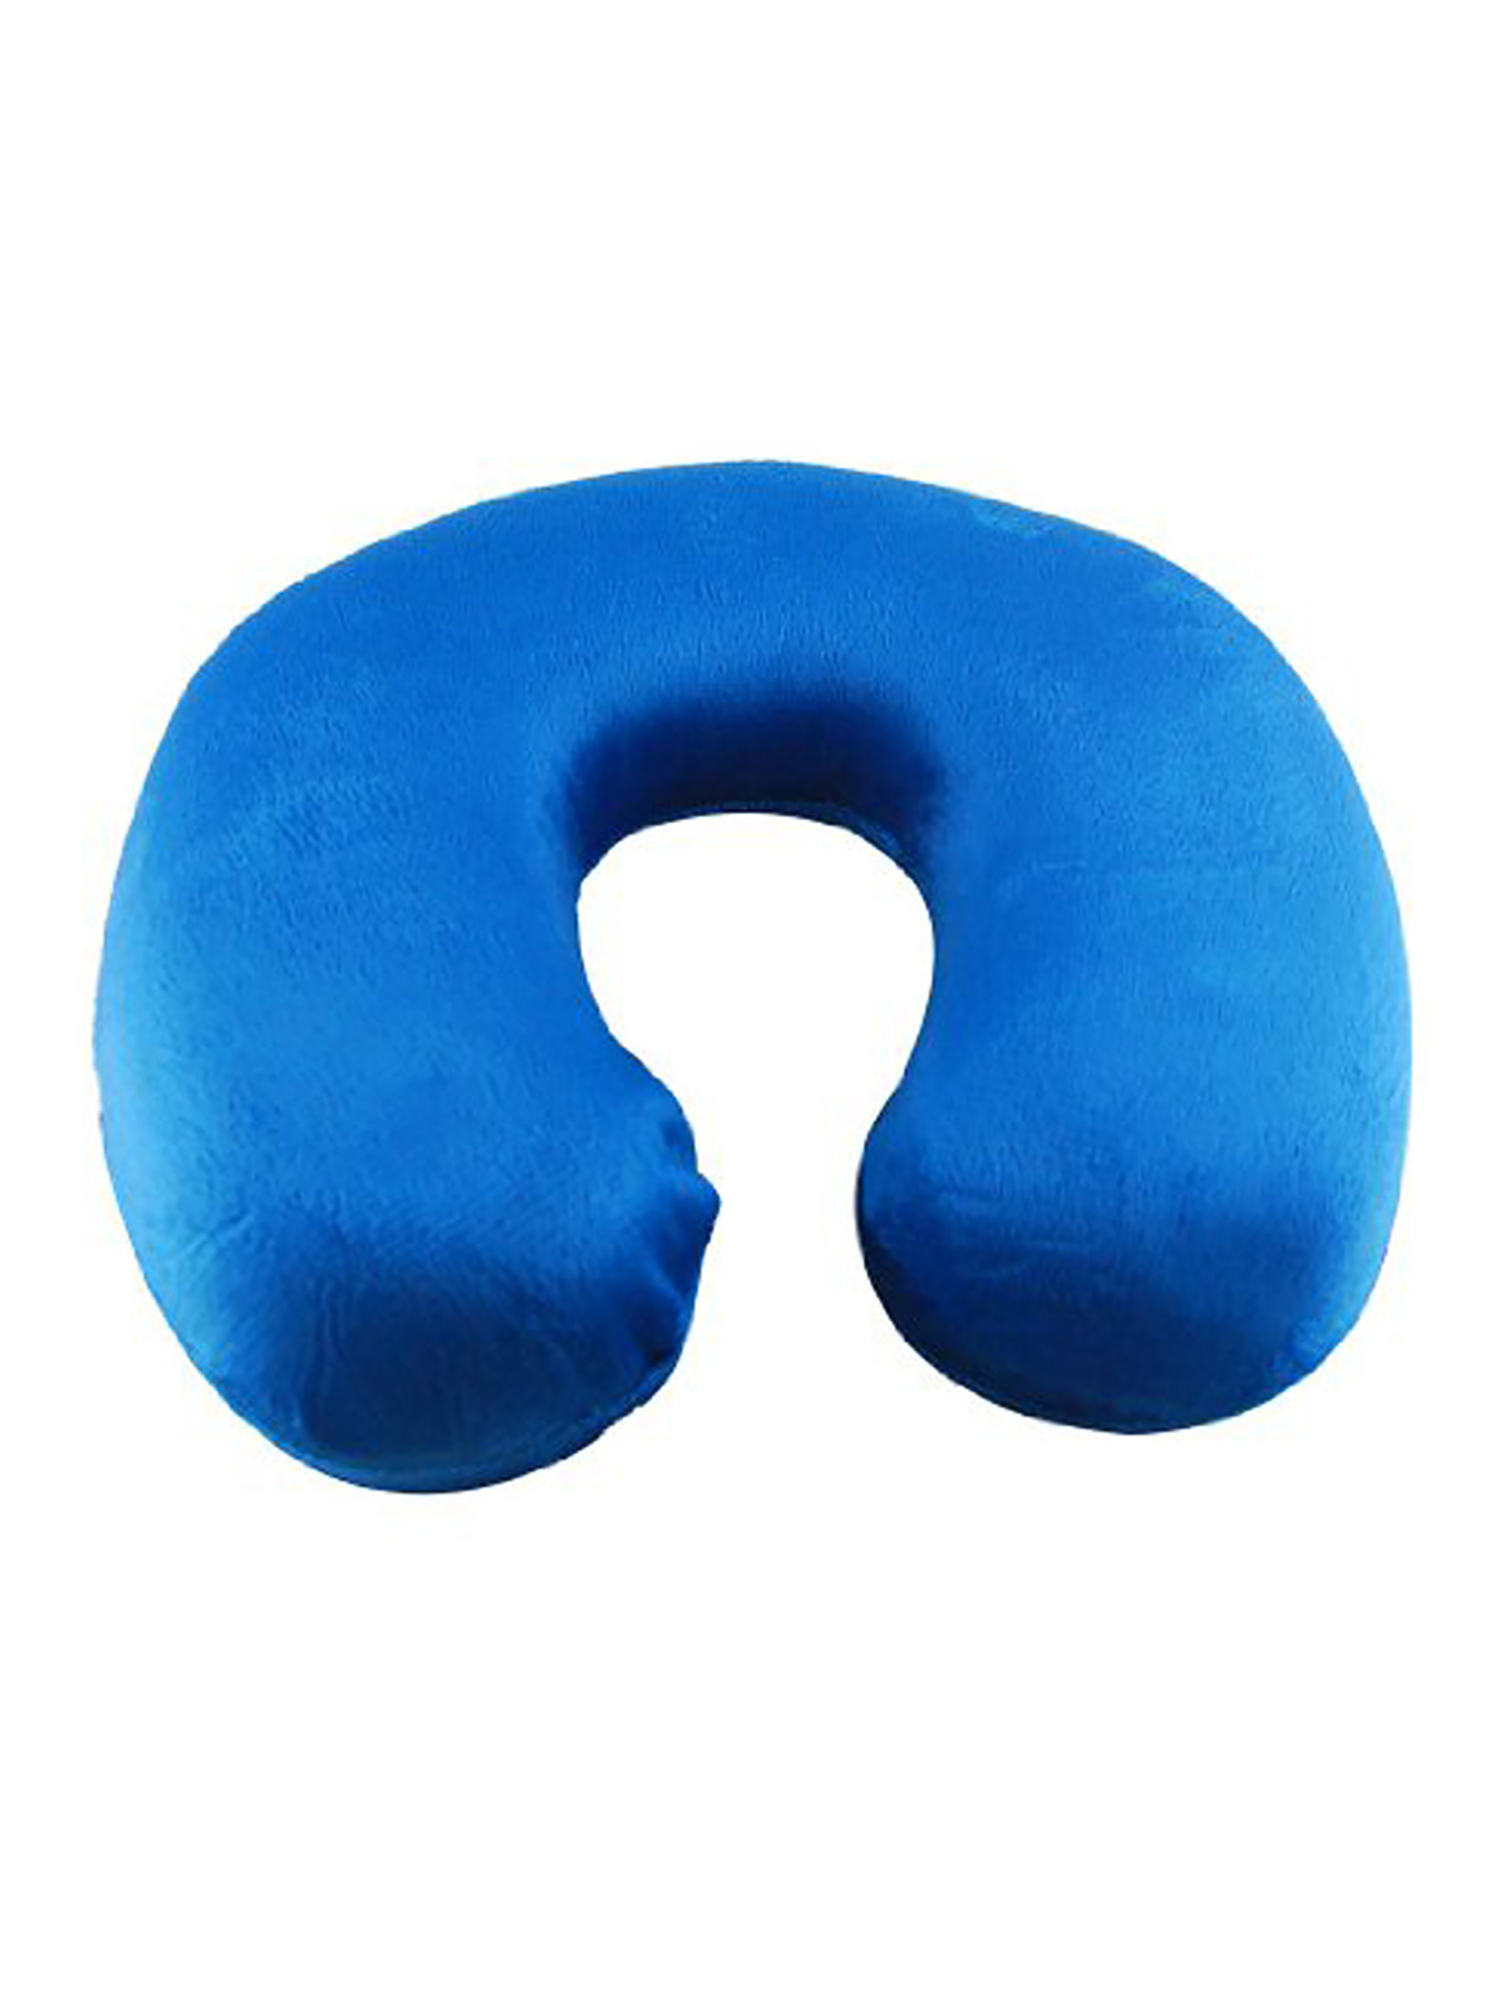 GEARONIC TM Travel Pillow Memory Foam Neck Cushion Support Rest Outdoors Car Flight - image 2 of 3